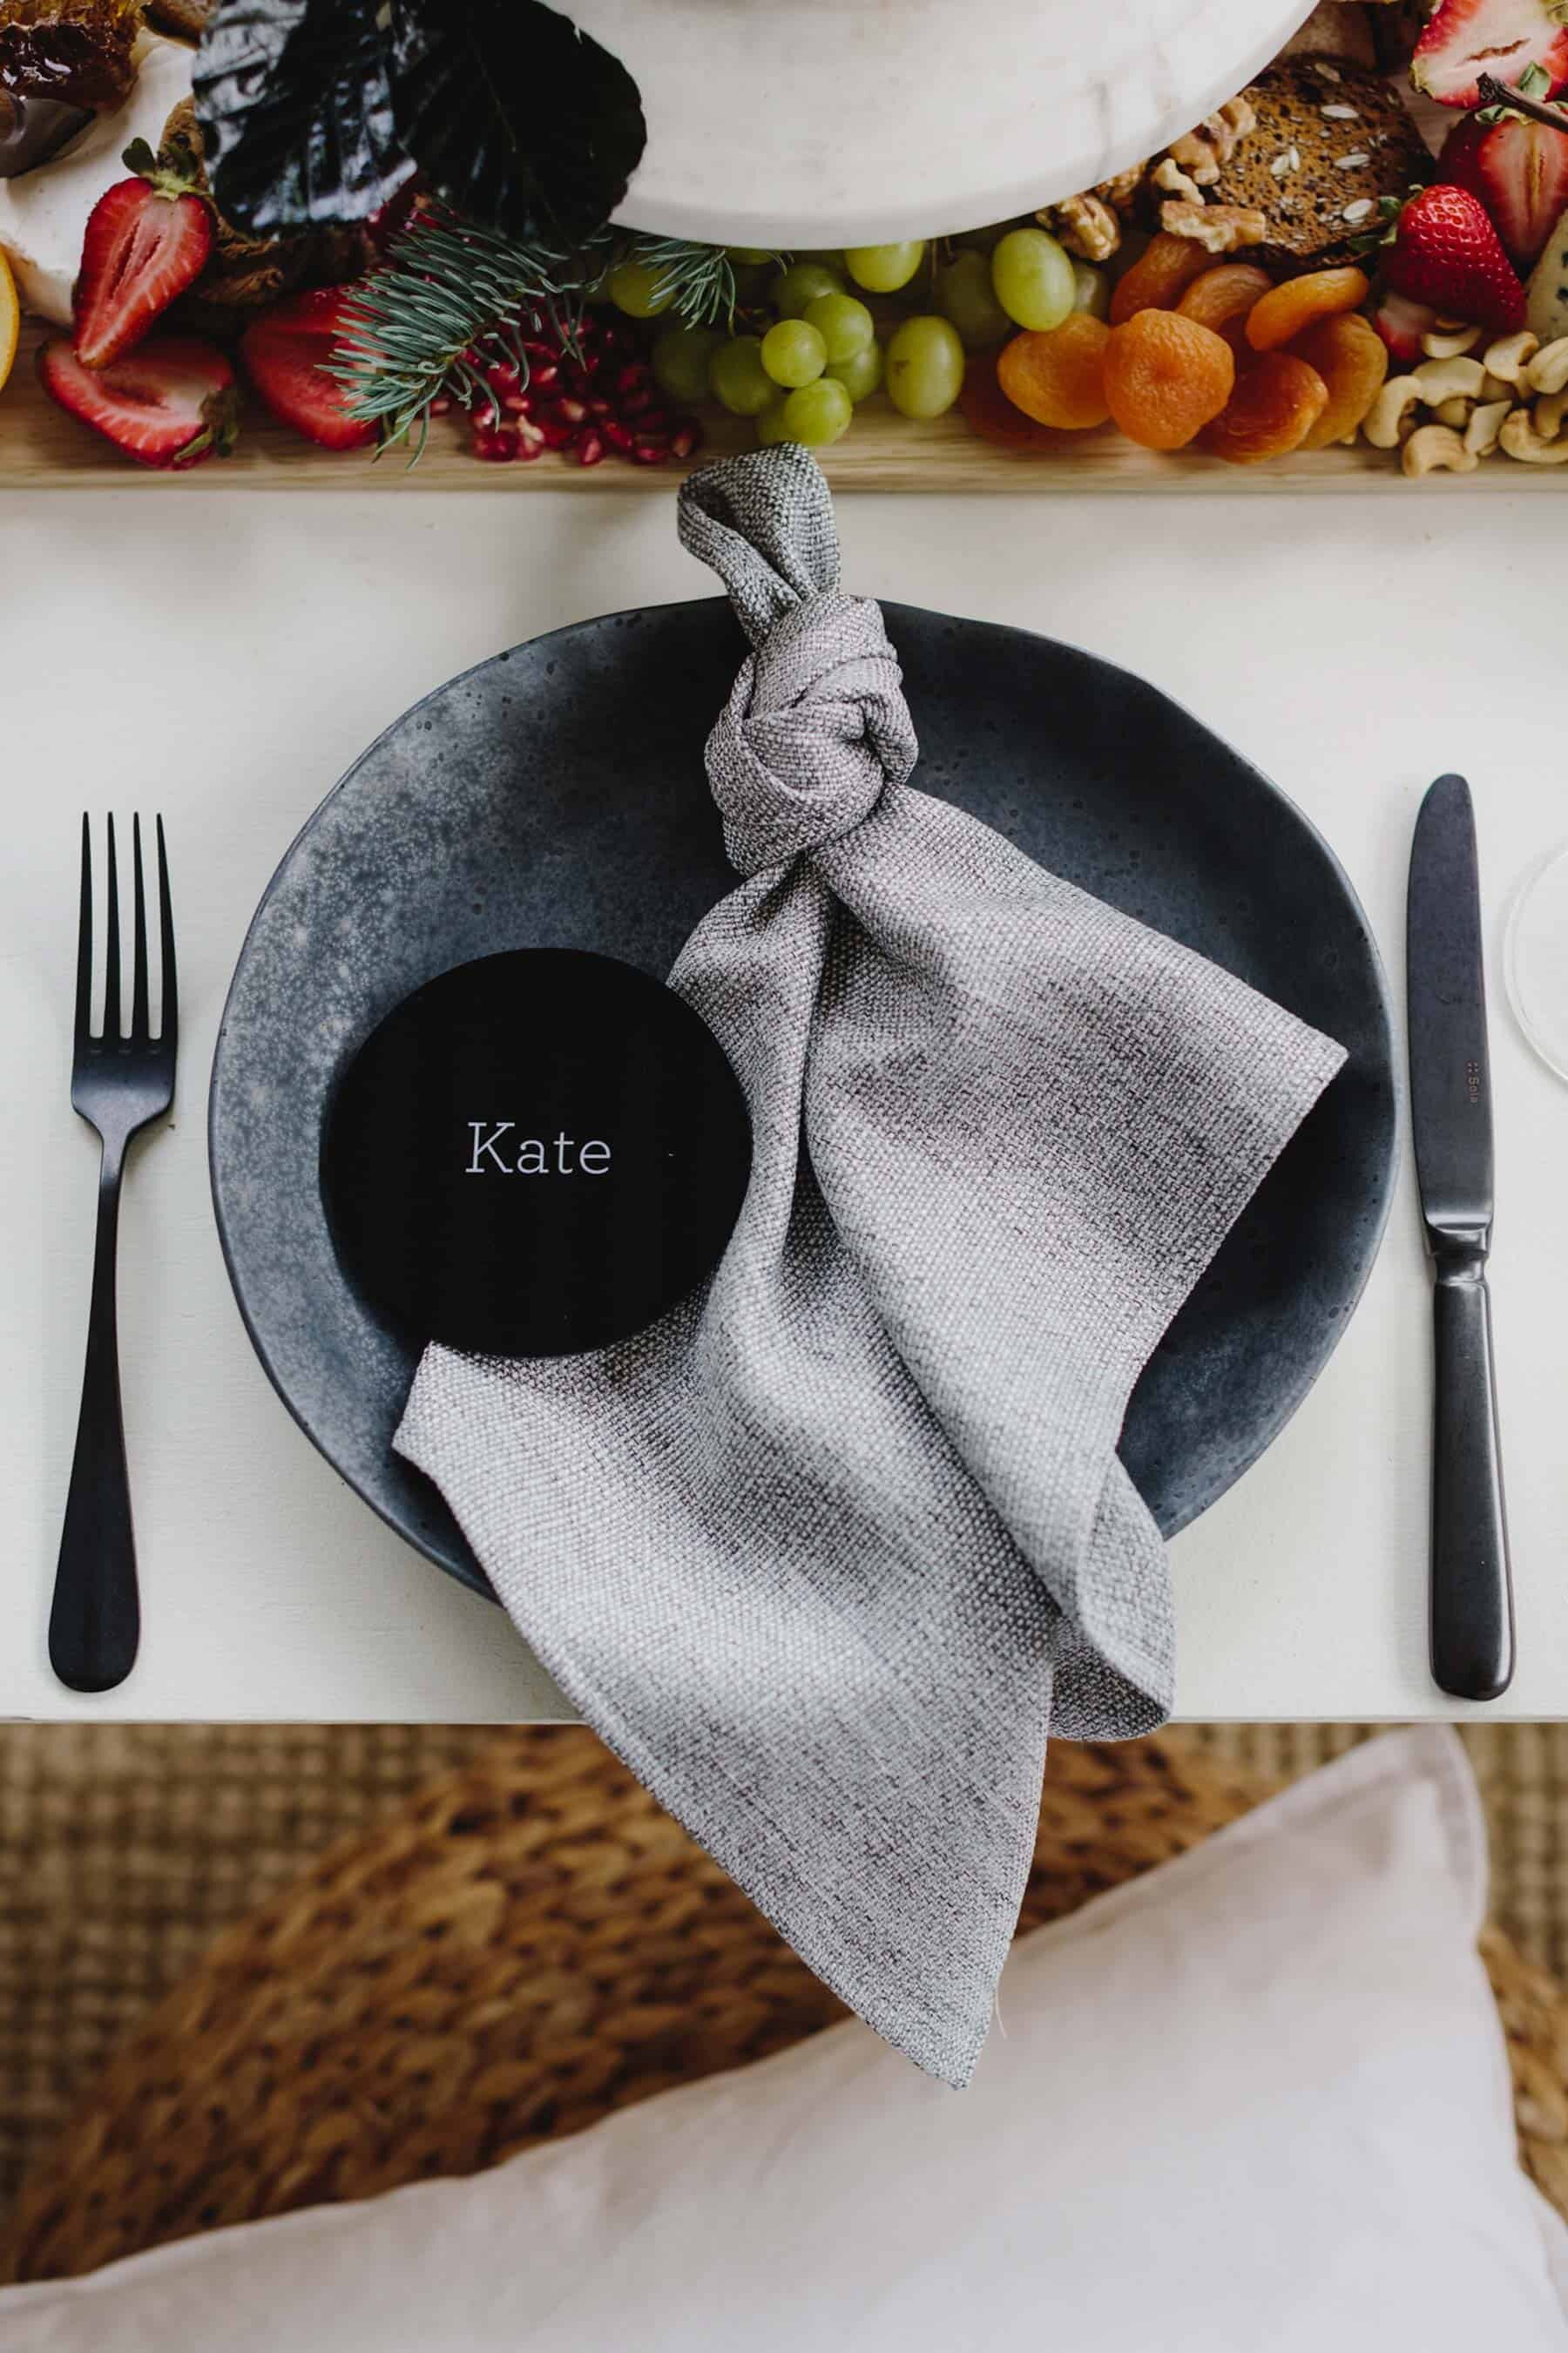 tied linen napkin on black plate with round acrylic place card